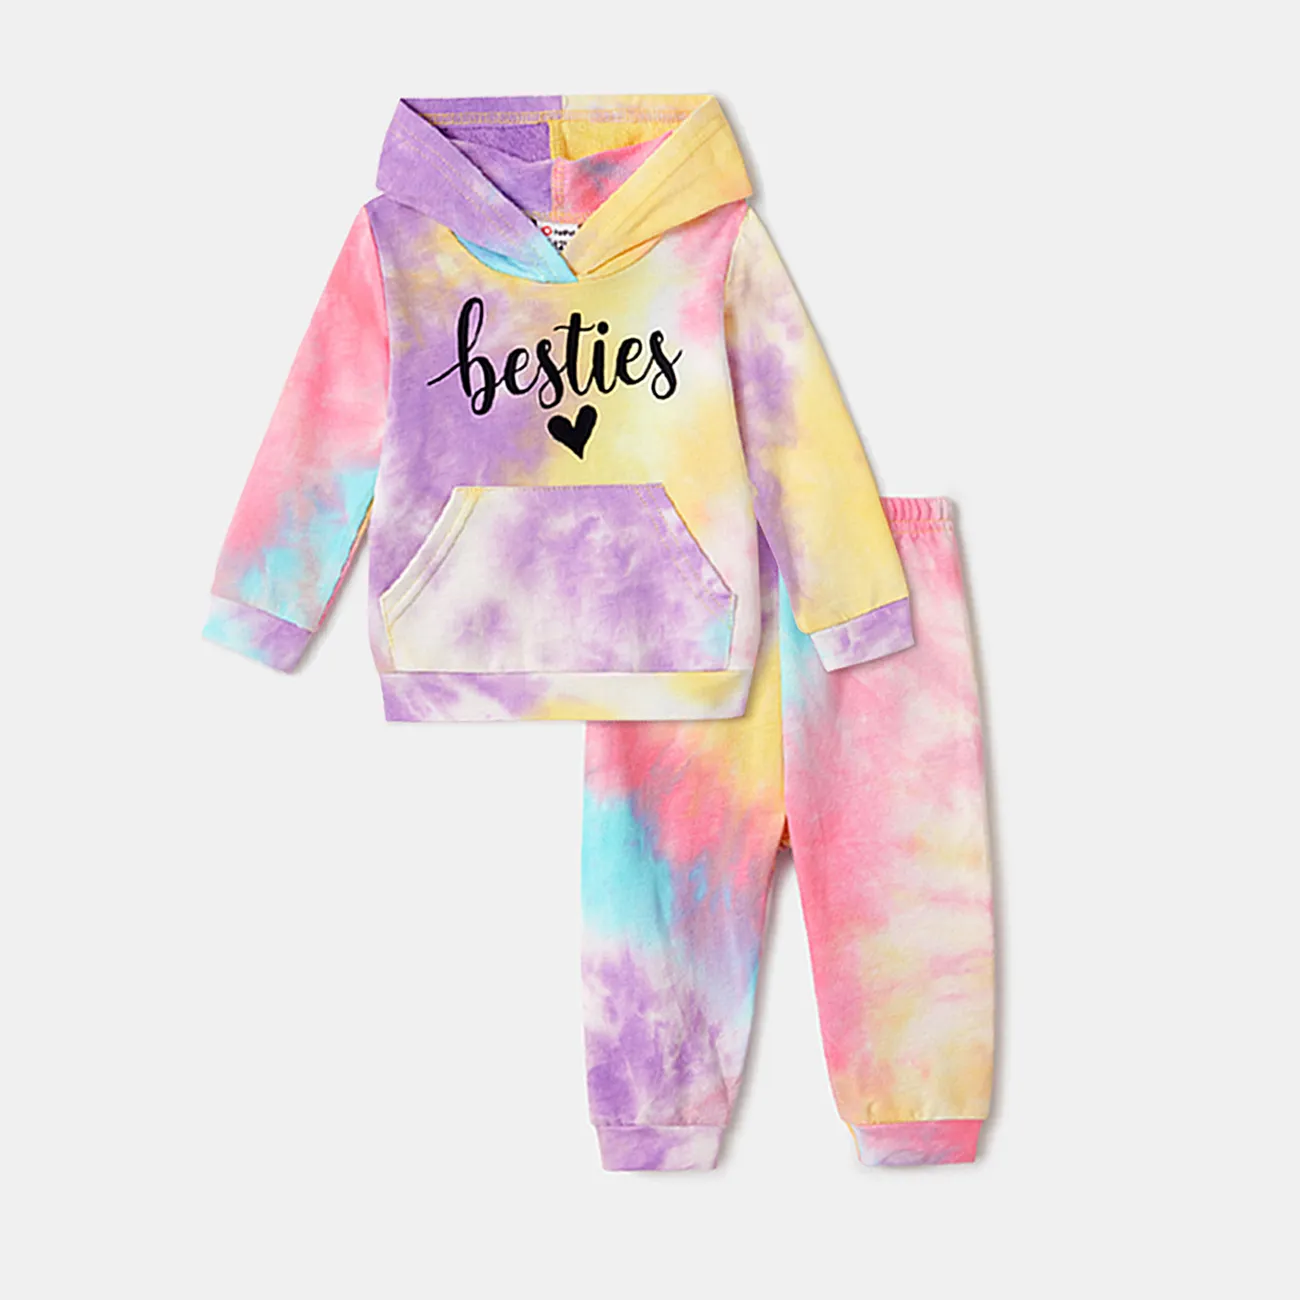 100% Cotton Letter Print Colorful Tie Dye Long-sleeve Hoodies for Mom and Me  big image 1